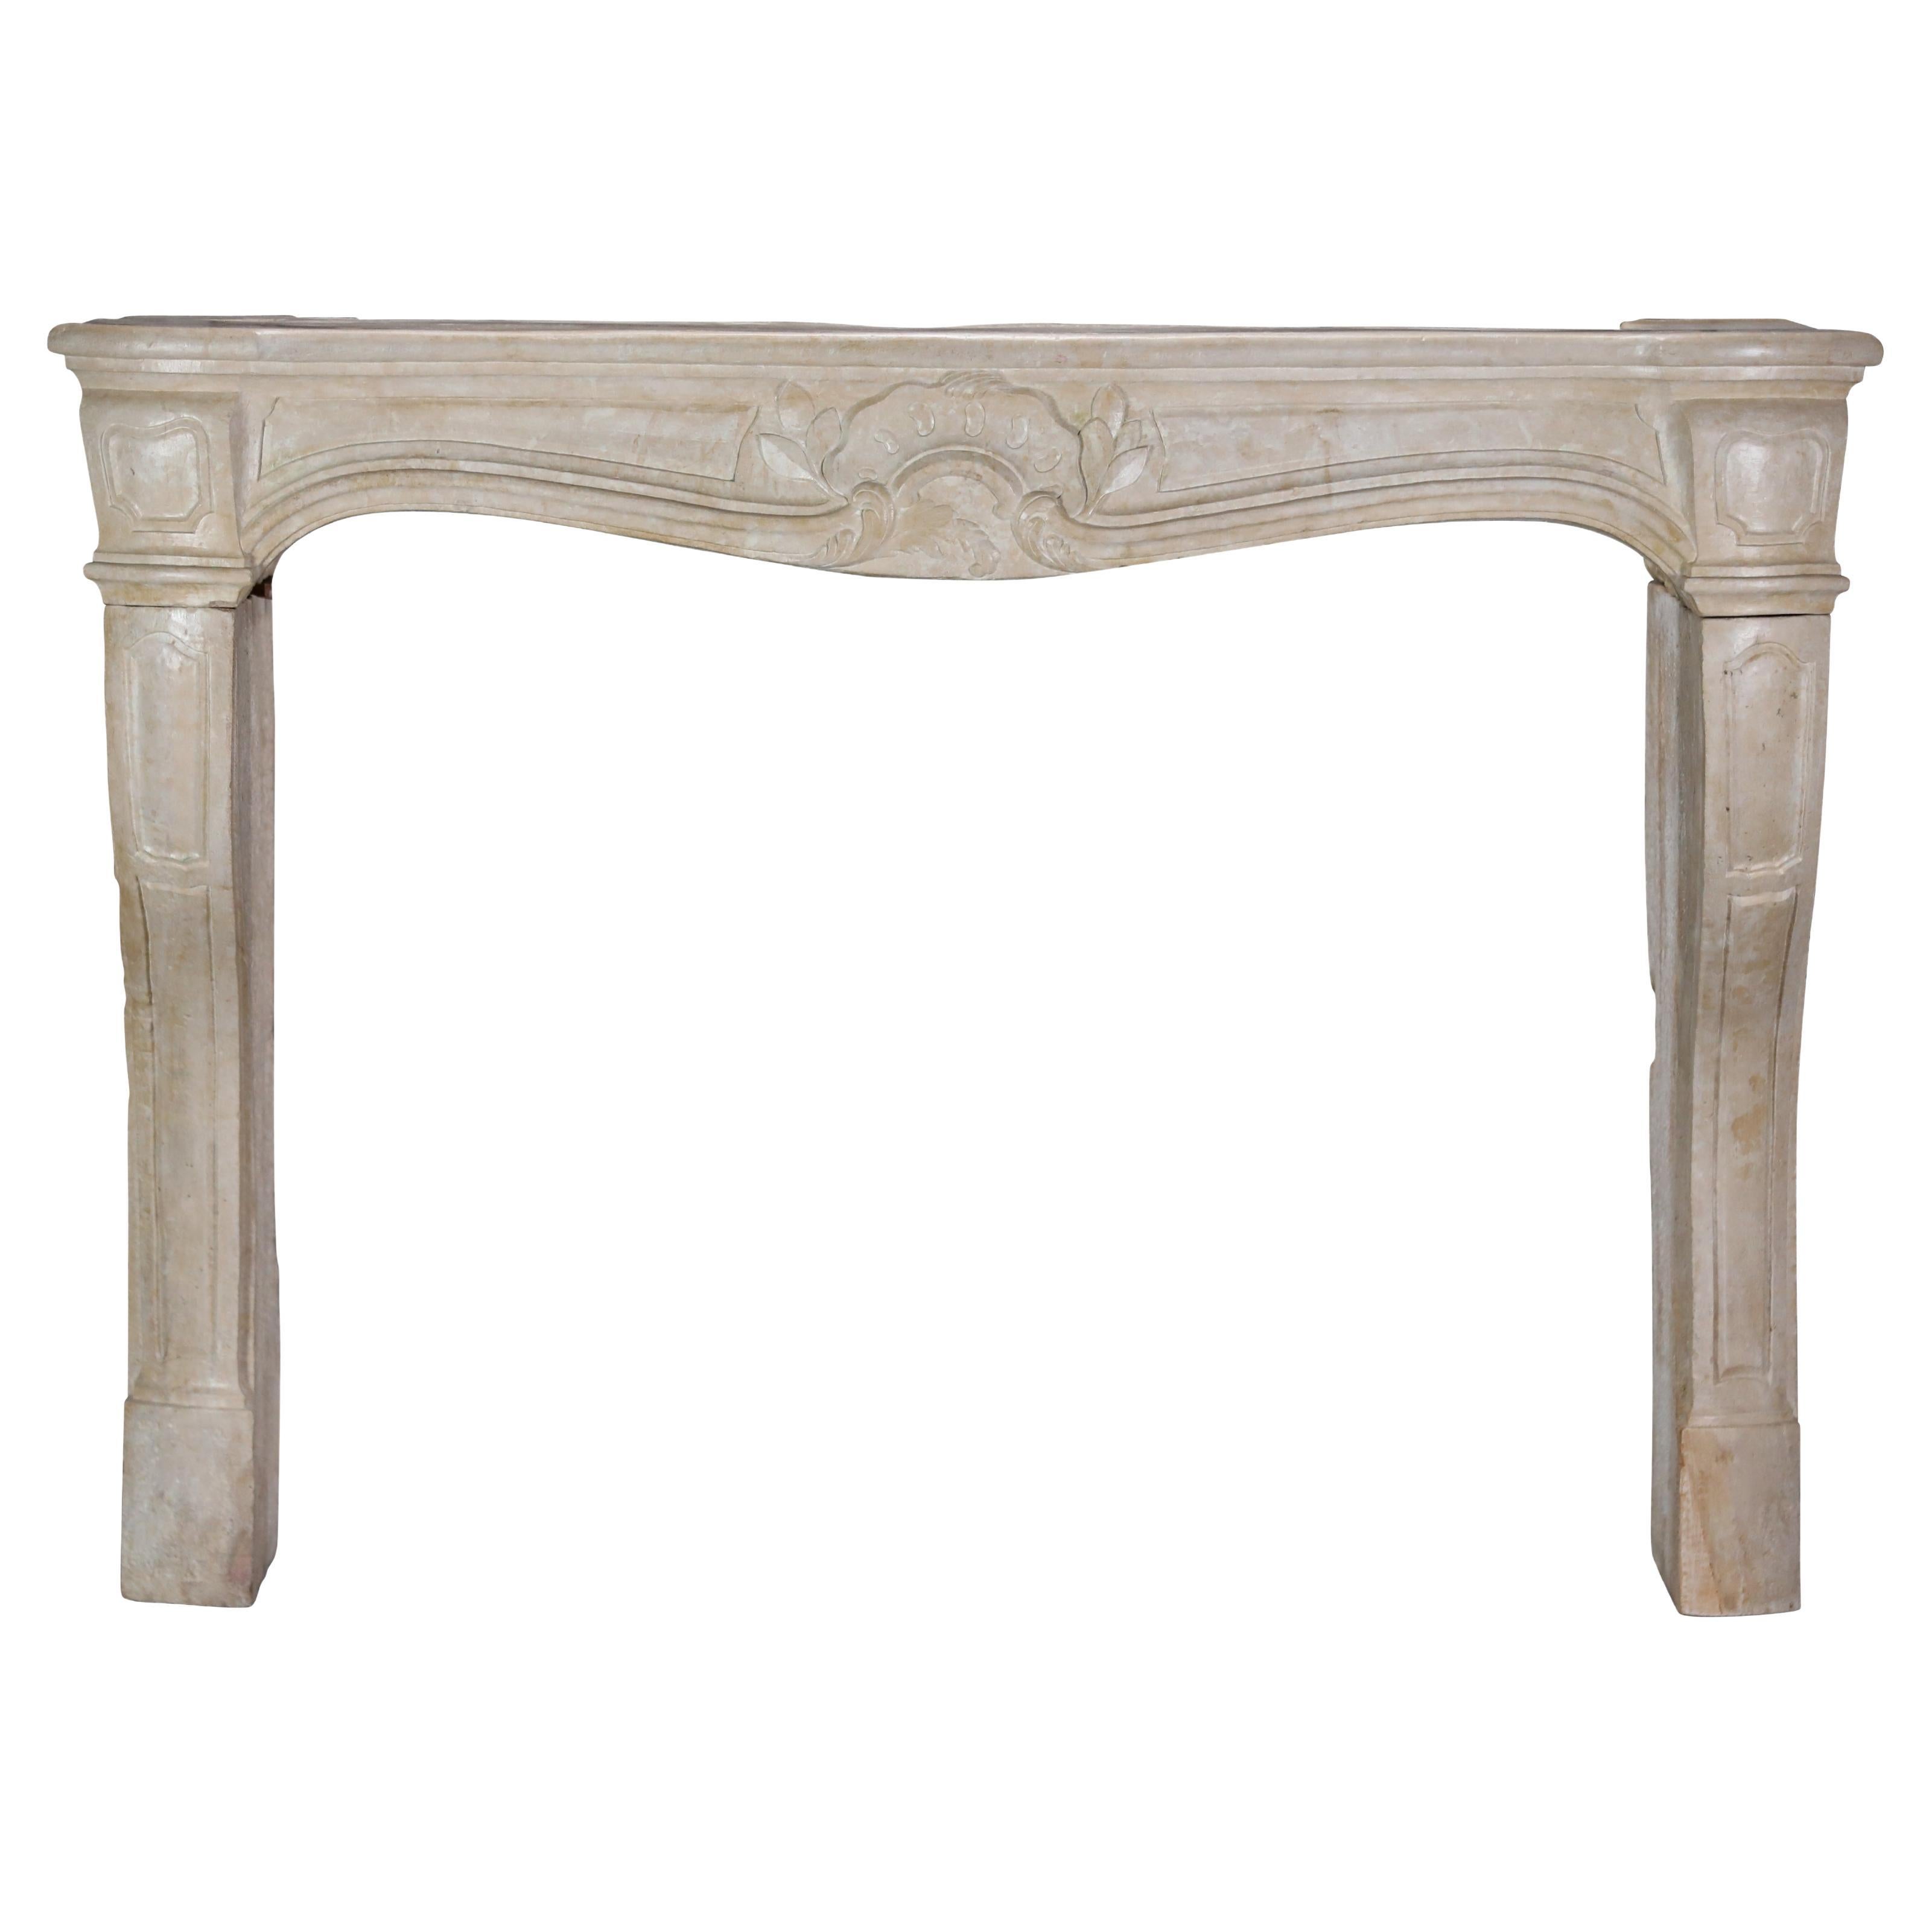 18th Century Classic French Regency Period Light Limestone Fireplace Mantle